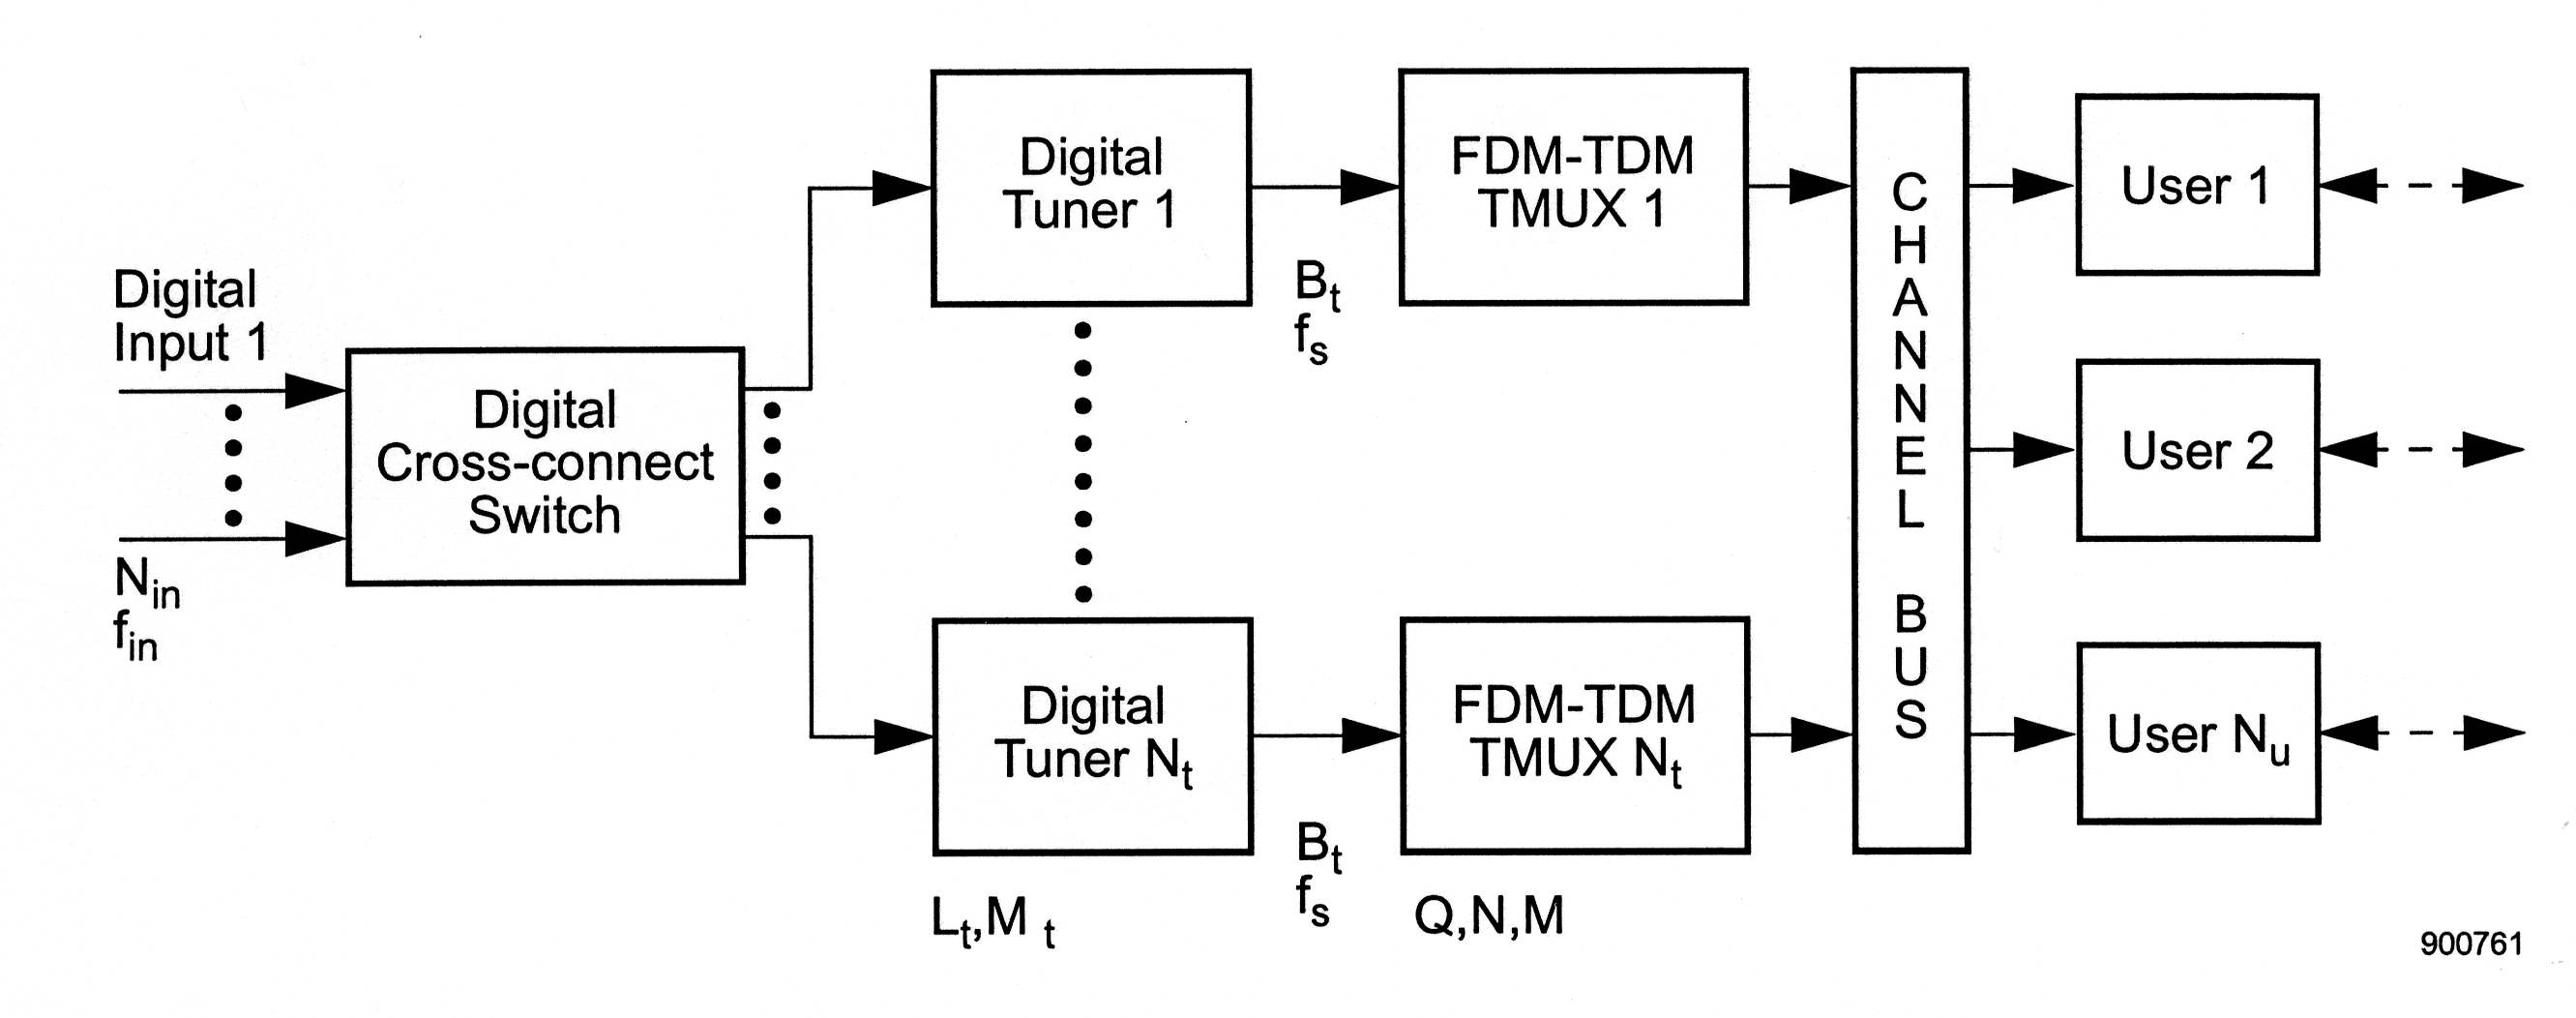 Figure two is a flow chart. It begins on the right with two arrows pointing to the right. The arrow on top is labeled Digital Input 1, and the arrow below is labeled N_in f_in. There are four black dots vertically aligned in between the two initial arrows. The arrows point at a rectangle containing the caption Digital Cross-connect Switch. Following this rectangle are two arrows pointing at two more rectangles. In between the arrows are four aligned black dots. The box that the upper arrow points to is labeled Digital Tuner 1, and the box that the lower arrow points to is labeled Digital Tuner N_t. Below the lower rectangle is the expression L_t, M_t. In between these rectangles are eight aligned black dots . Each rectangle is followed by an arrow pointing to the right at another set of rectangles. The arrows are both labeled with the caption B_t and f_s. The rectangle on top that follows the arrow is labeled FDM-TDM TMUX 1. The rectangle on the bottom that follows the arrow is labeled  FDM-TDM TMUX N_t. These two rectangles are followed by two arrows that point at one single long rectangle titled Channel Bus. There are three arrows exiting channel bus to the right at three rectangles, labeled User 1, user 2, and user N_u. Following these rectangles are dashed arrows pointing both left and right.